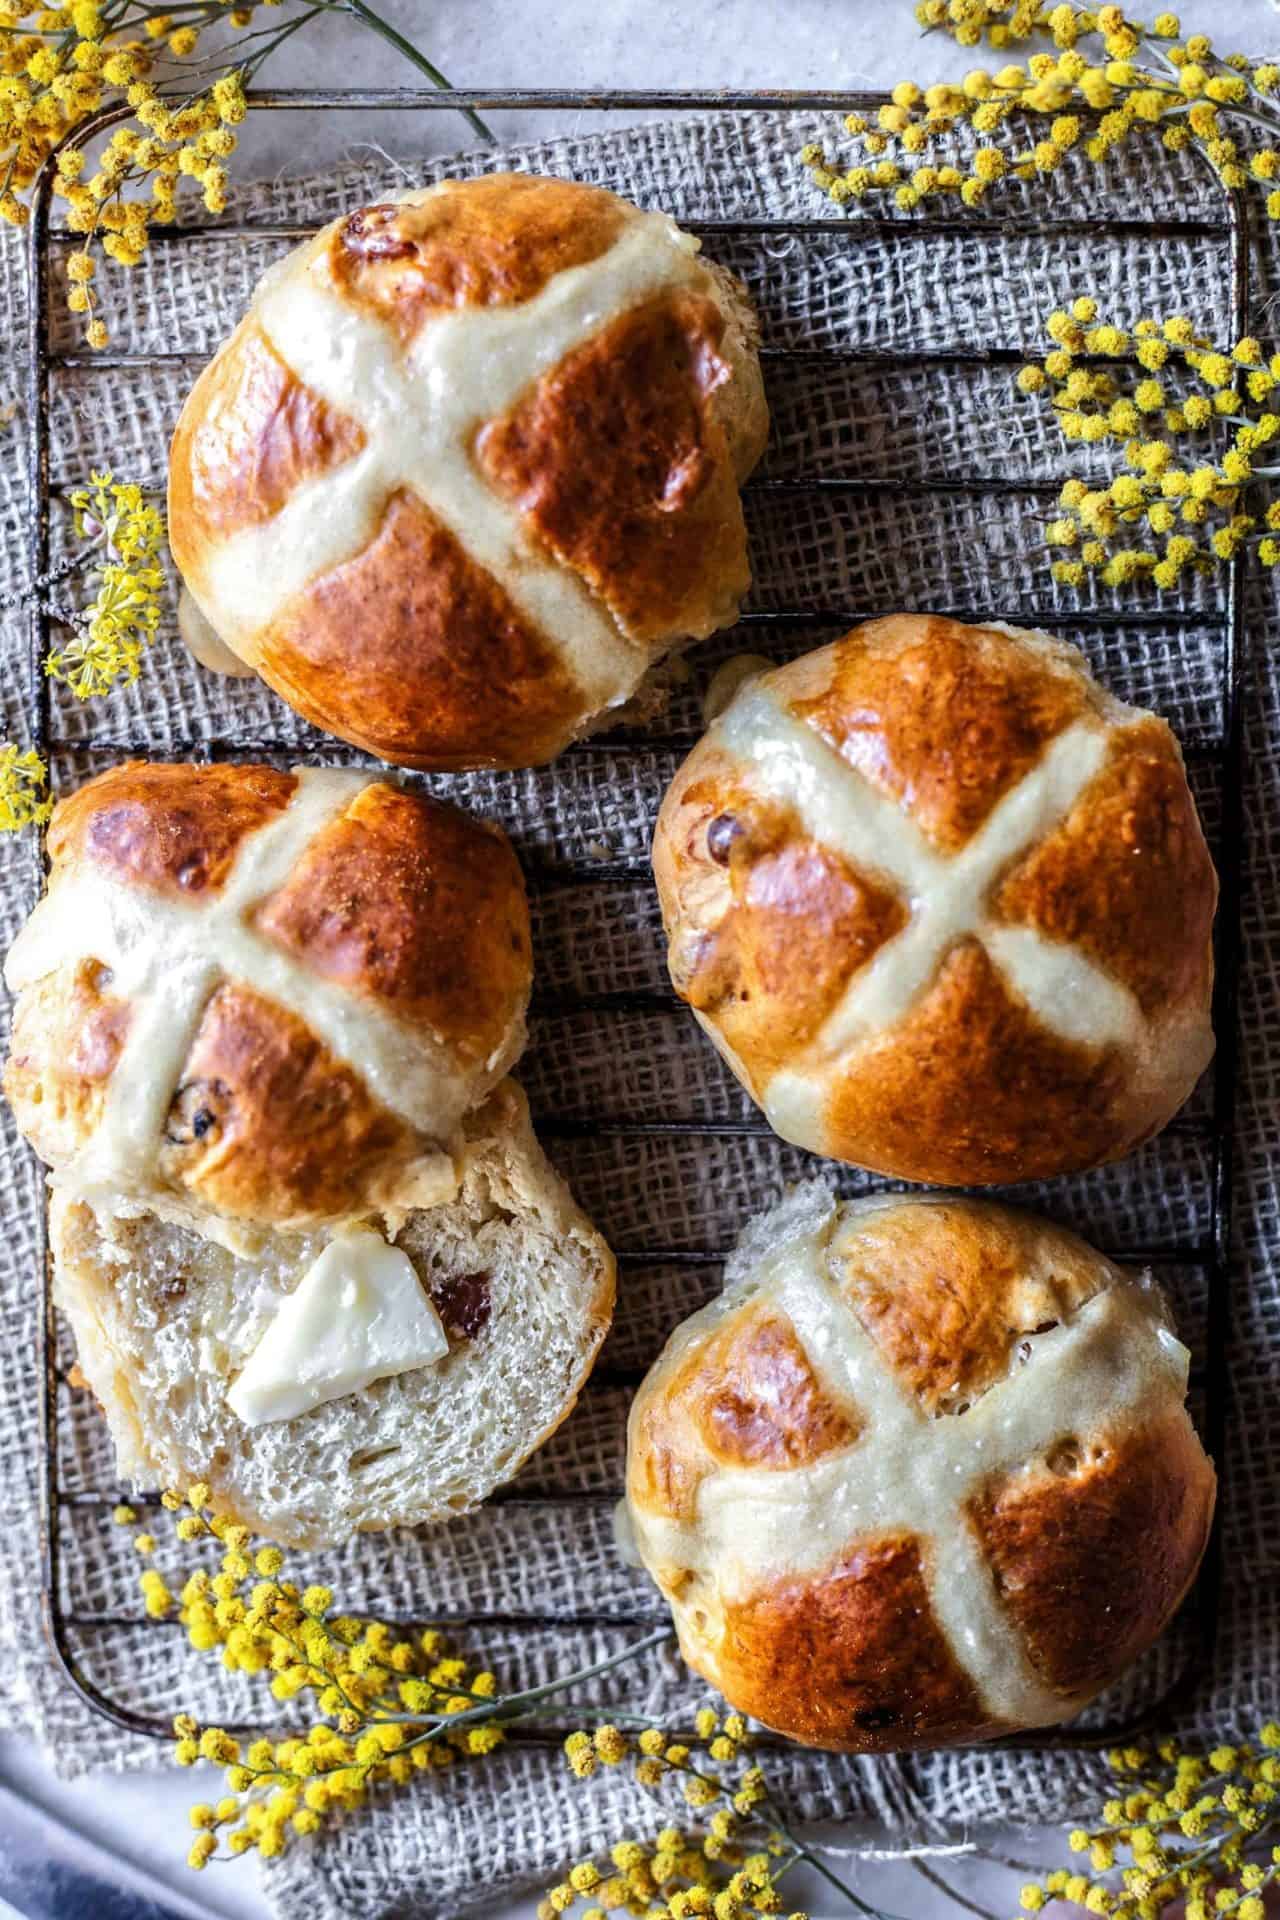 These Gluten-Free Hot Cross Buns are FODMAP friendly, very simple to make, pillowy soft, perfectly spiced, and just as delicious as the regular buns.
